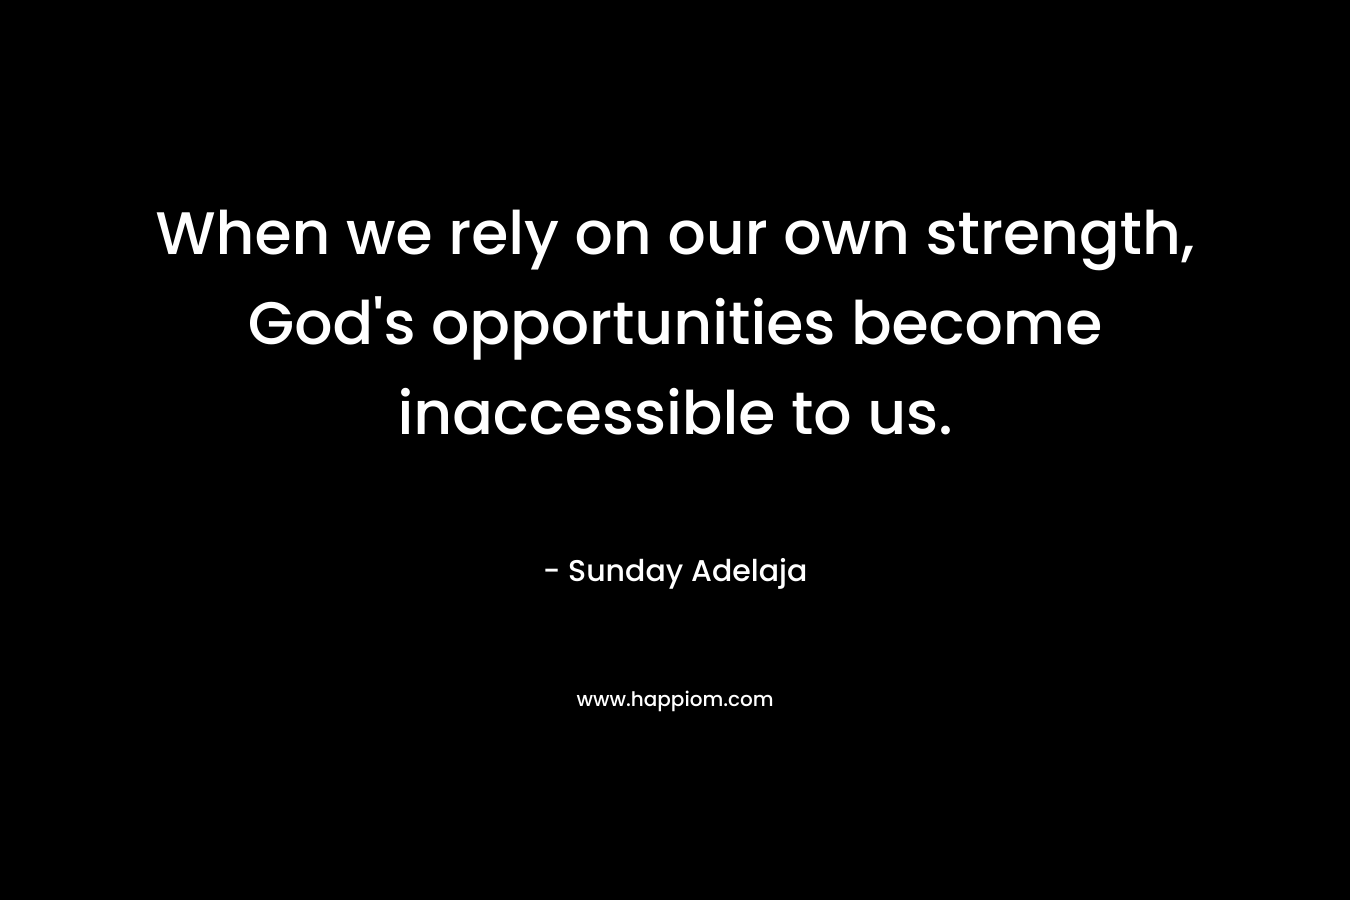 When we rely on our own strength, God’s opportunities become inaccessible to us. – Sunday Adelaja